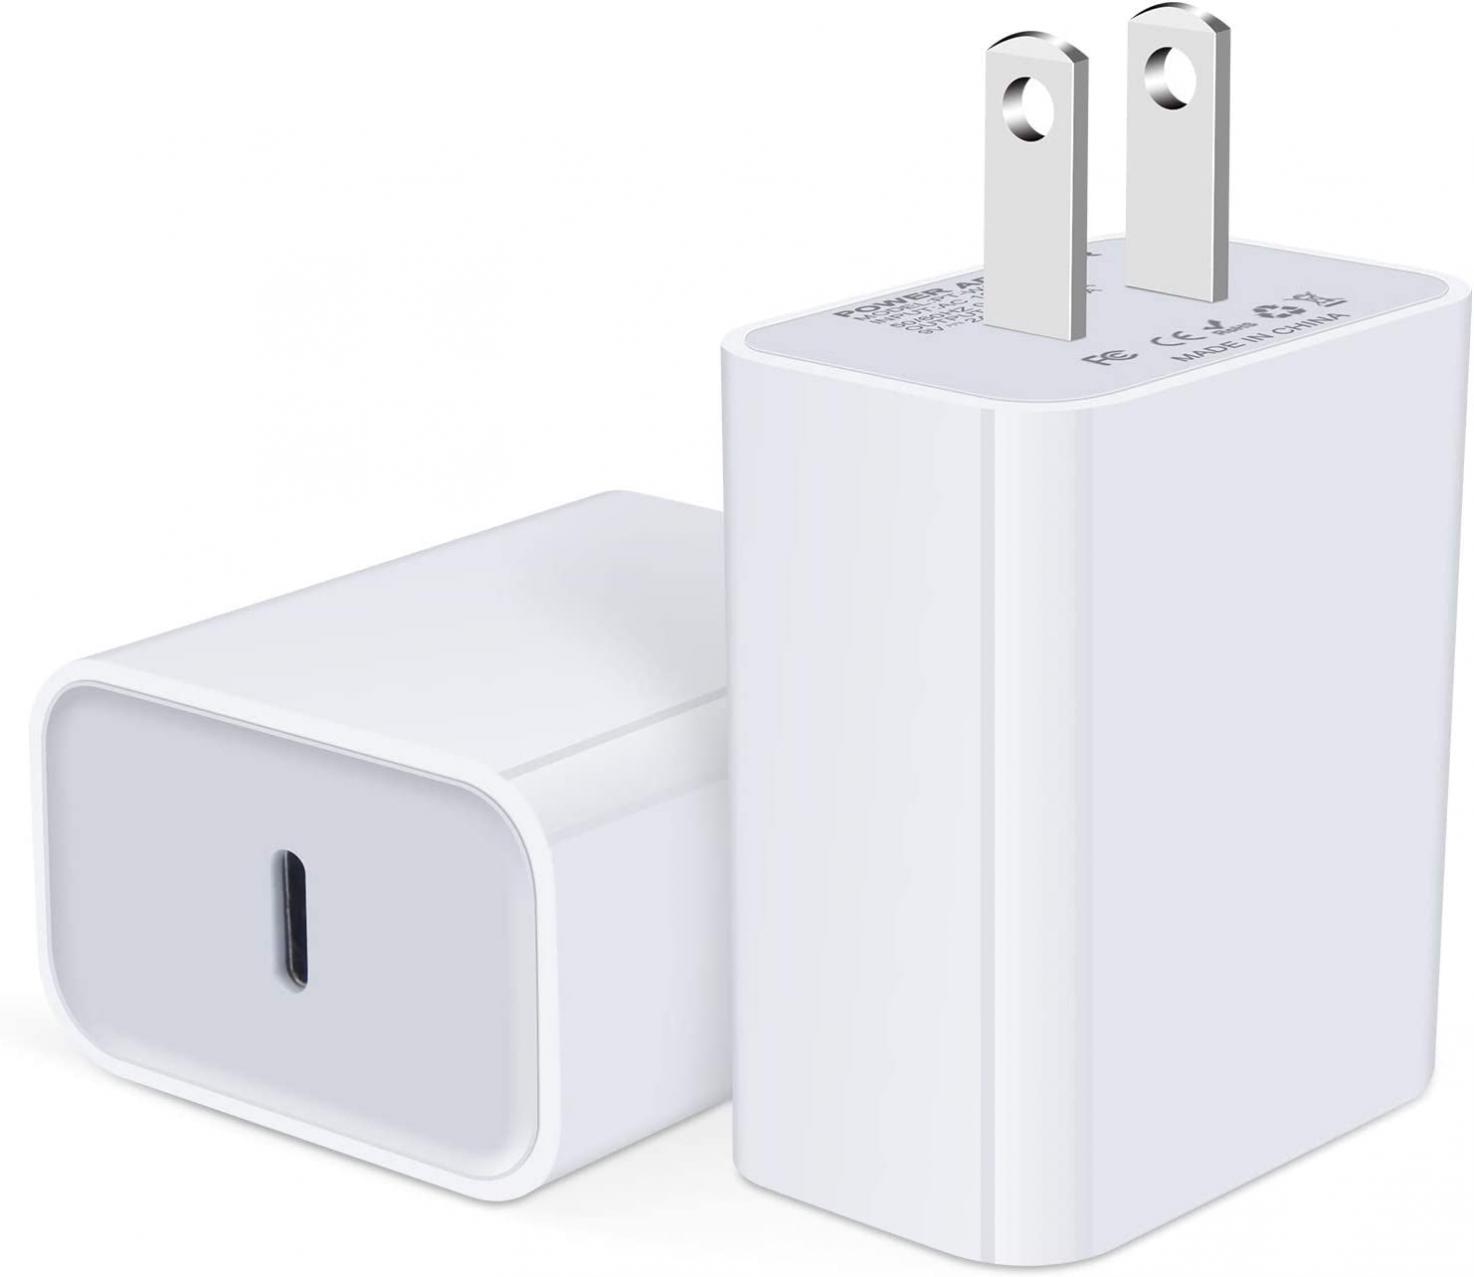 iPhone Charging Block Dual USB C Wall Charger Fast Charging USBC Charger Block Power Adapter for iPhone 13 13 Pro 13 Pro Max 12 11 SE XR 8,iPad Pro,Samsung Galaxy S22 Ultra A03s A13 A53 5G,Pixel 6